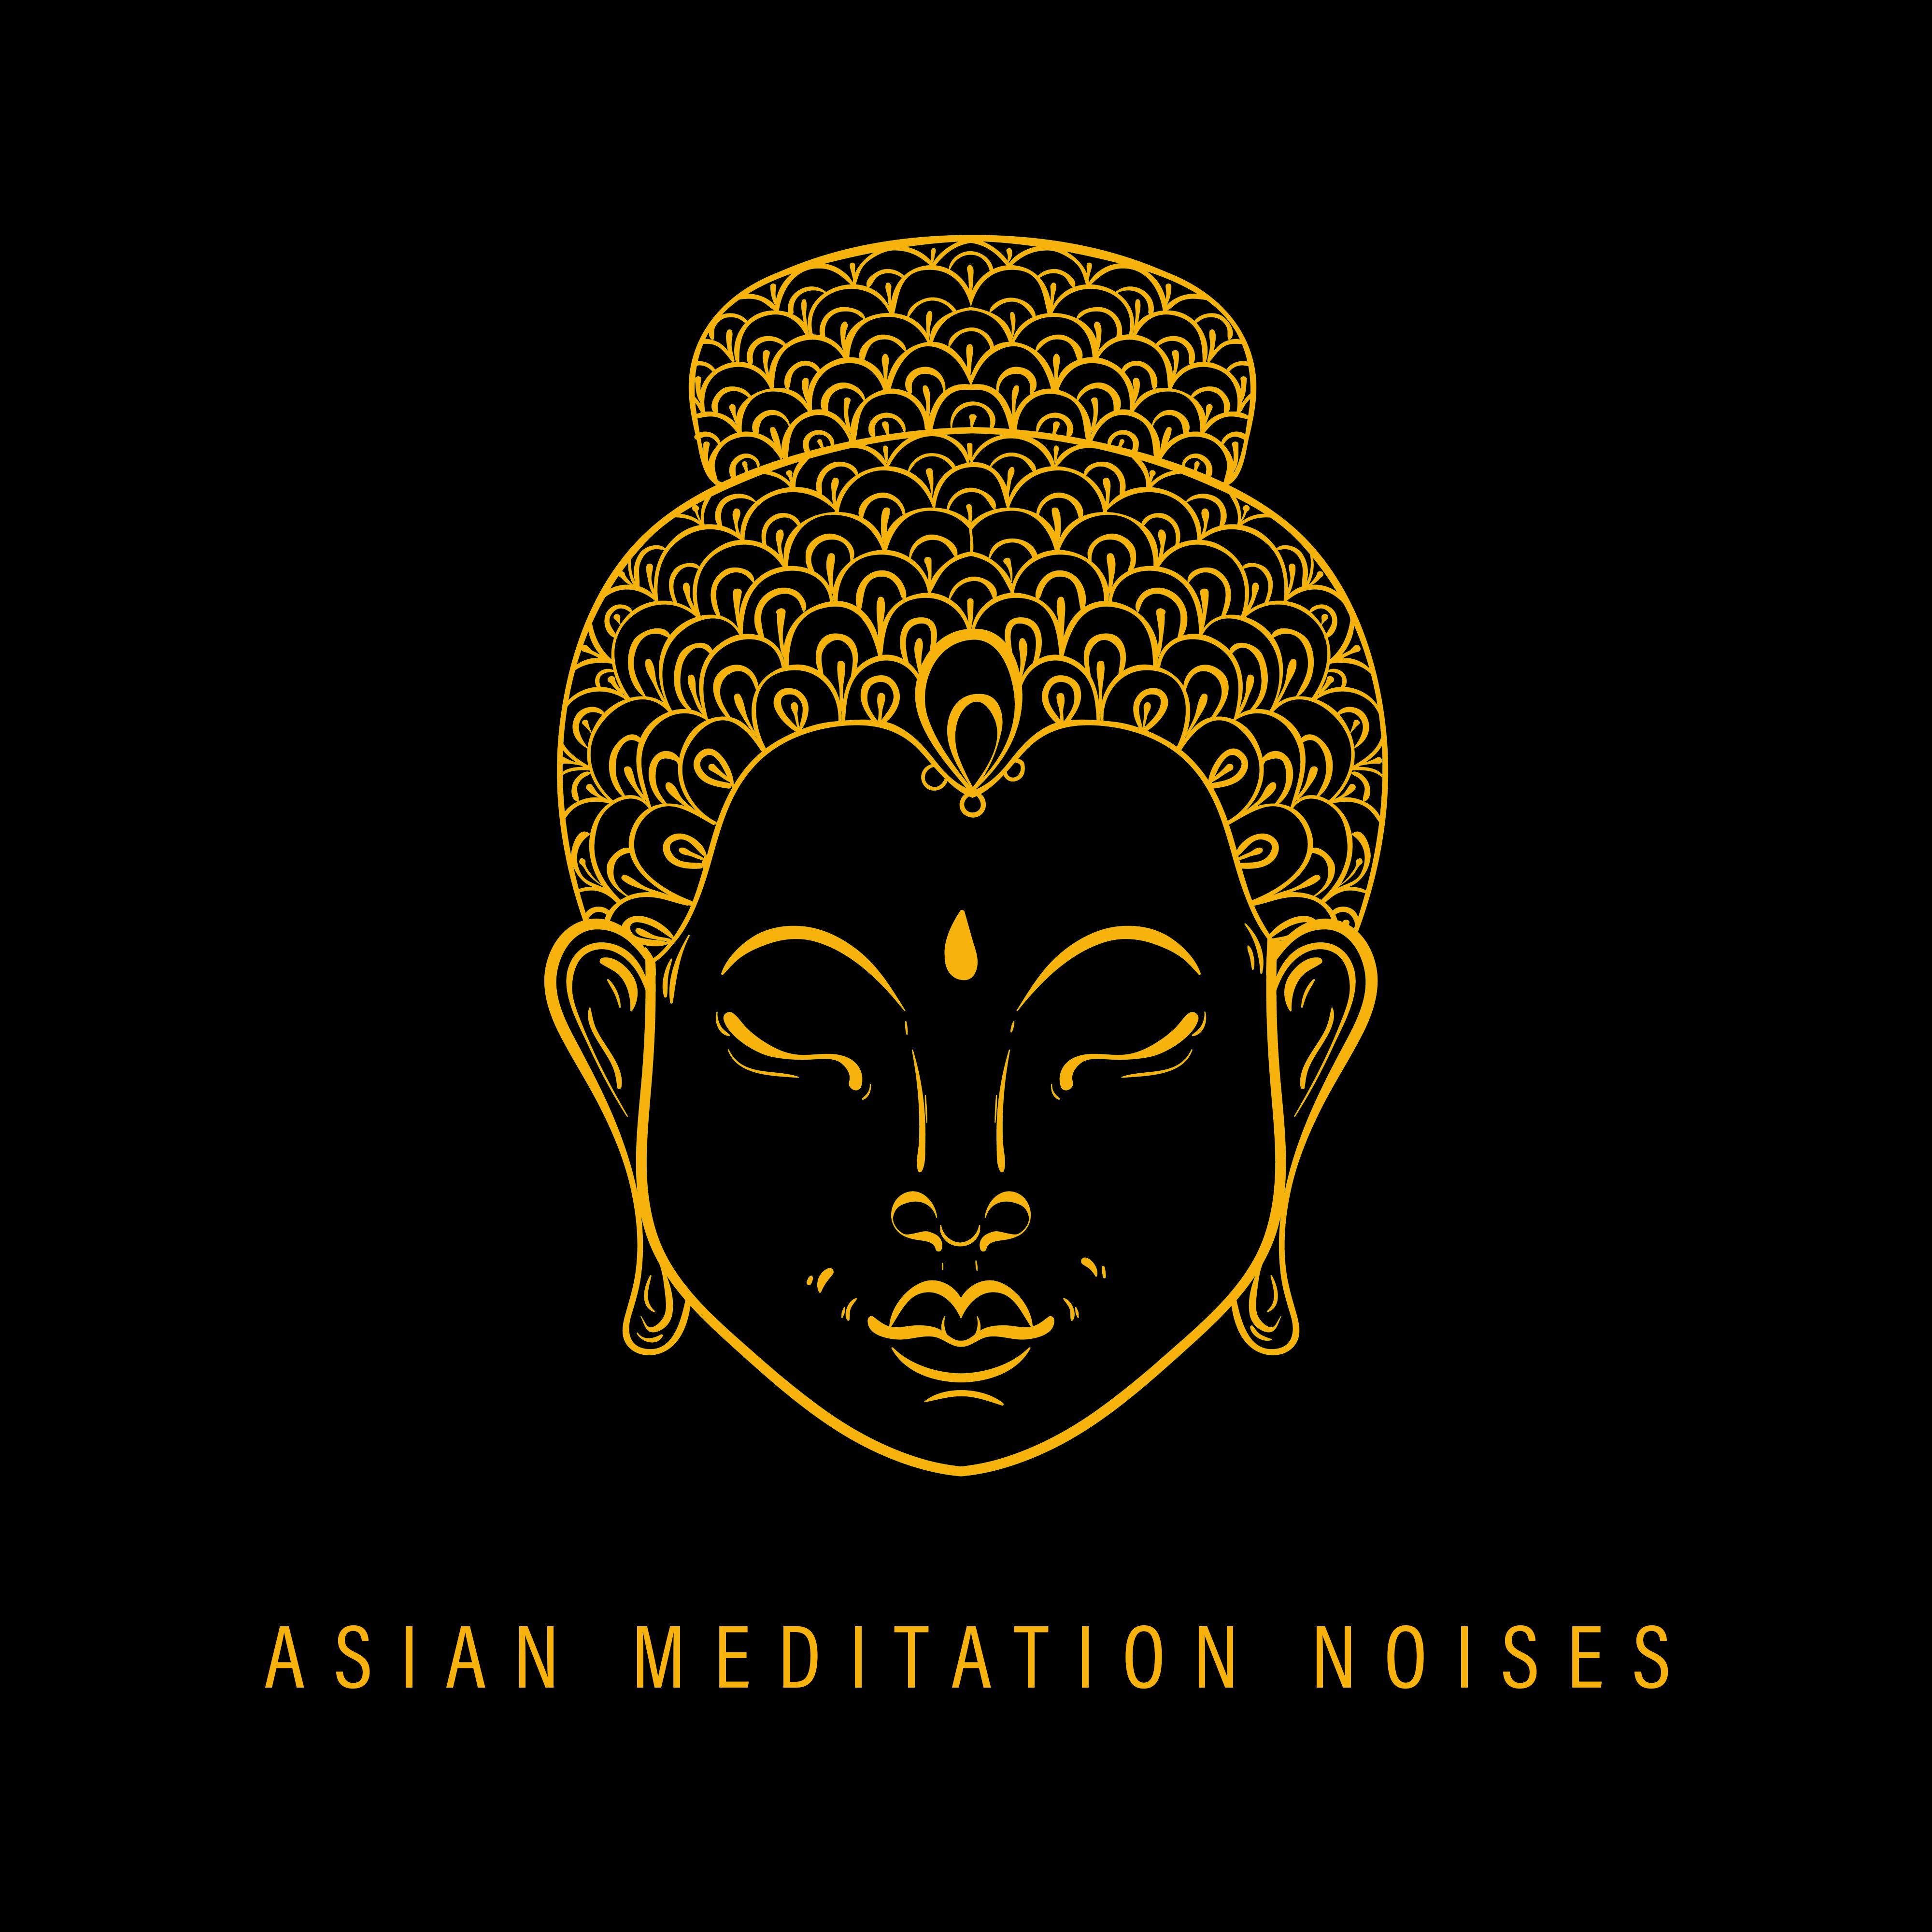 Asian Meditation Noises to Provide Focus  Mindfulness Relaxation, Yoga Practice, Zen Serenity, Sacral Chakra Meditation, Stress Relief, Yoga Music to Relax